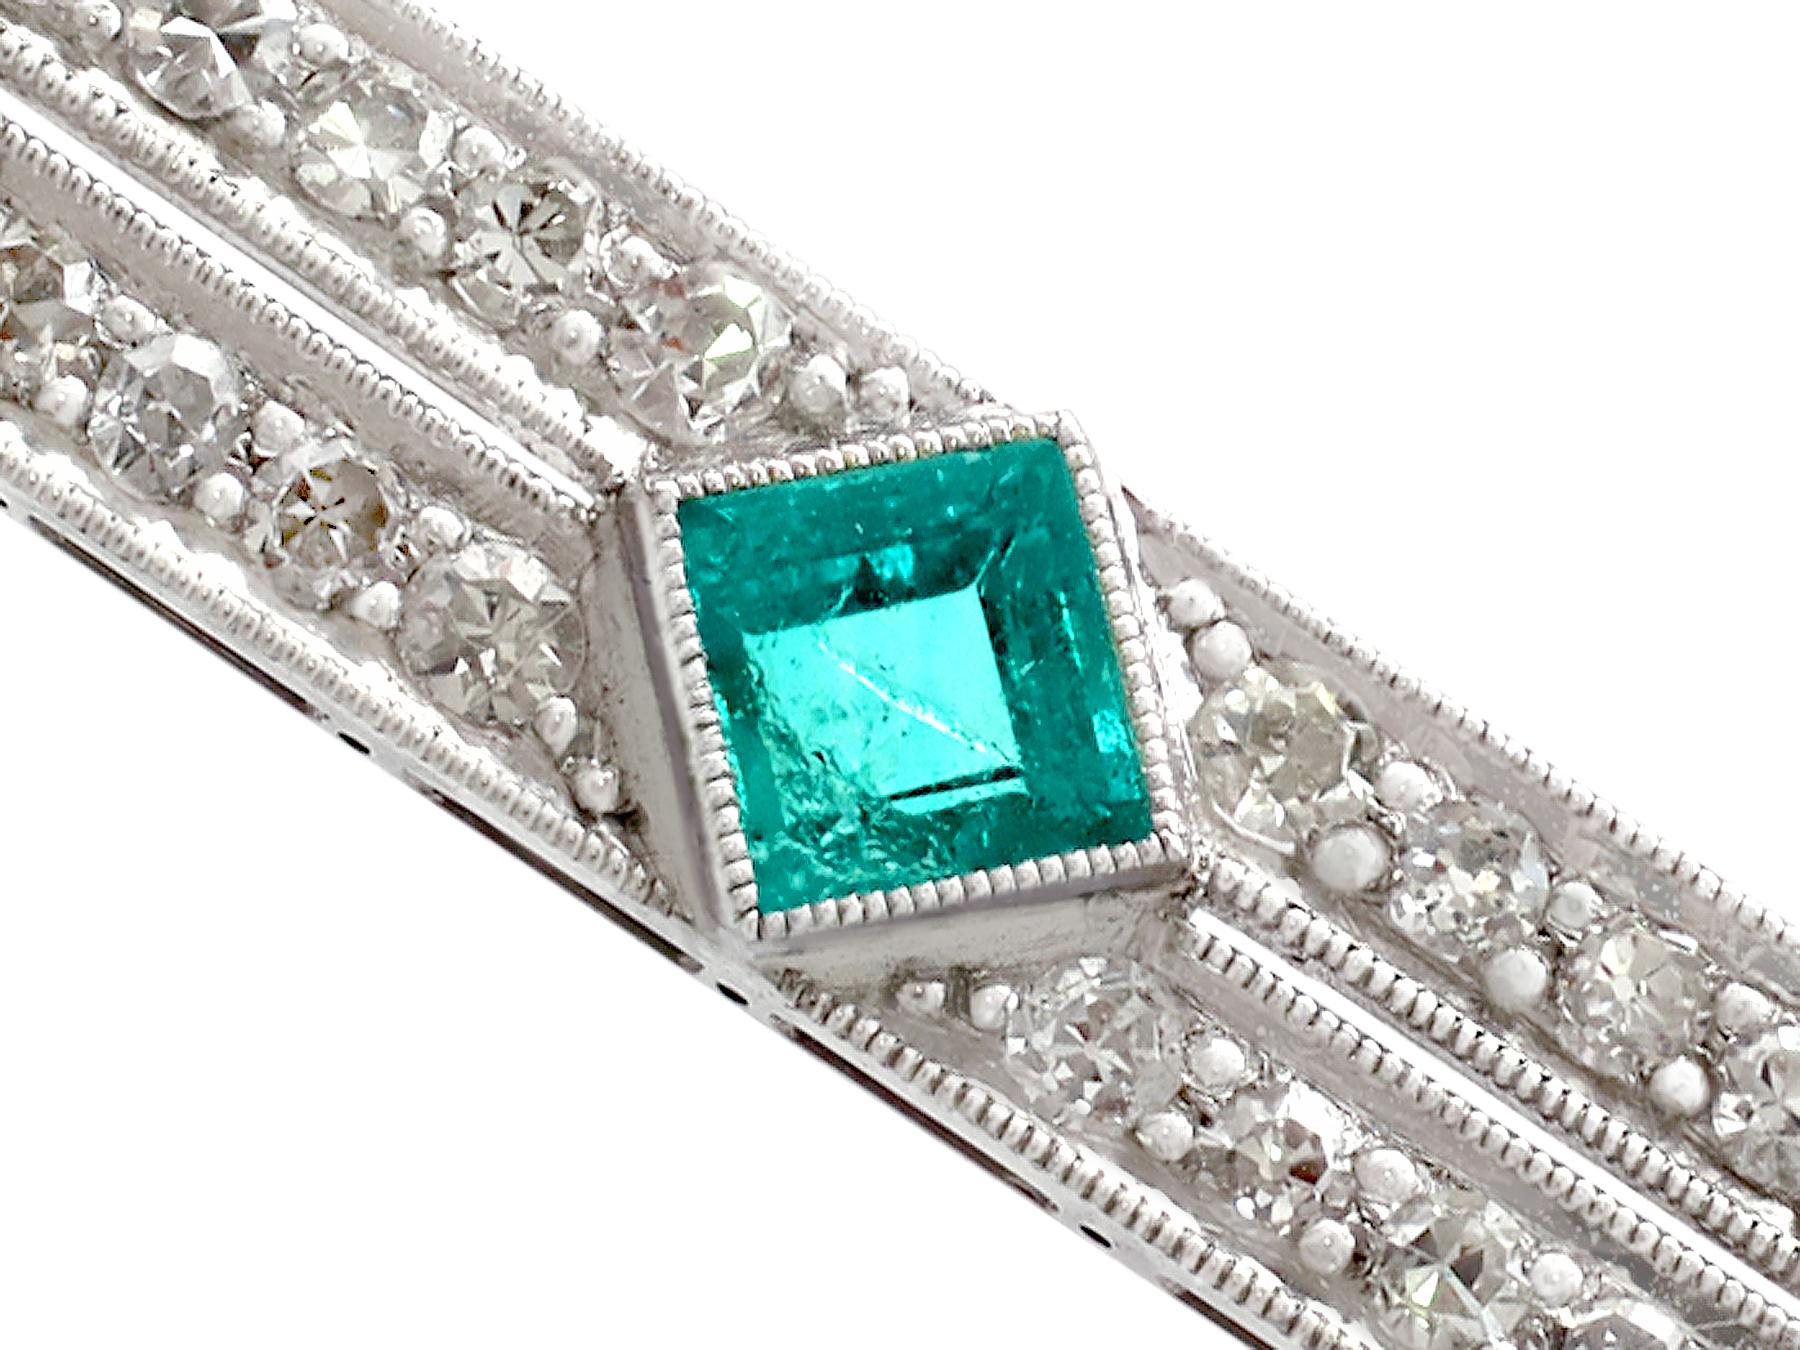 A stunning, fine and impressive antique Art Deco style 0.48 carat emerald and 1.29 carat diamond, platinum brooch; part of our antique jewelry and estate jewelry collections.

This stunning antique diamond and emerald brooch has been crafted in